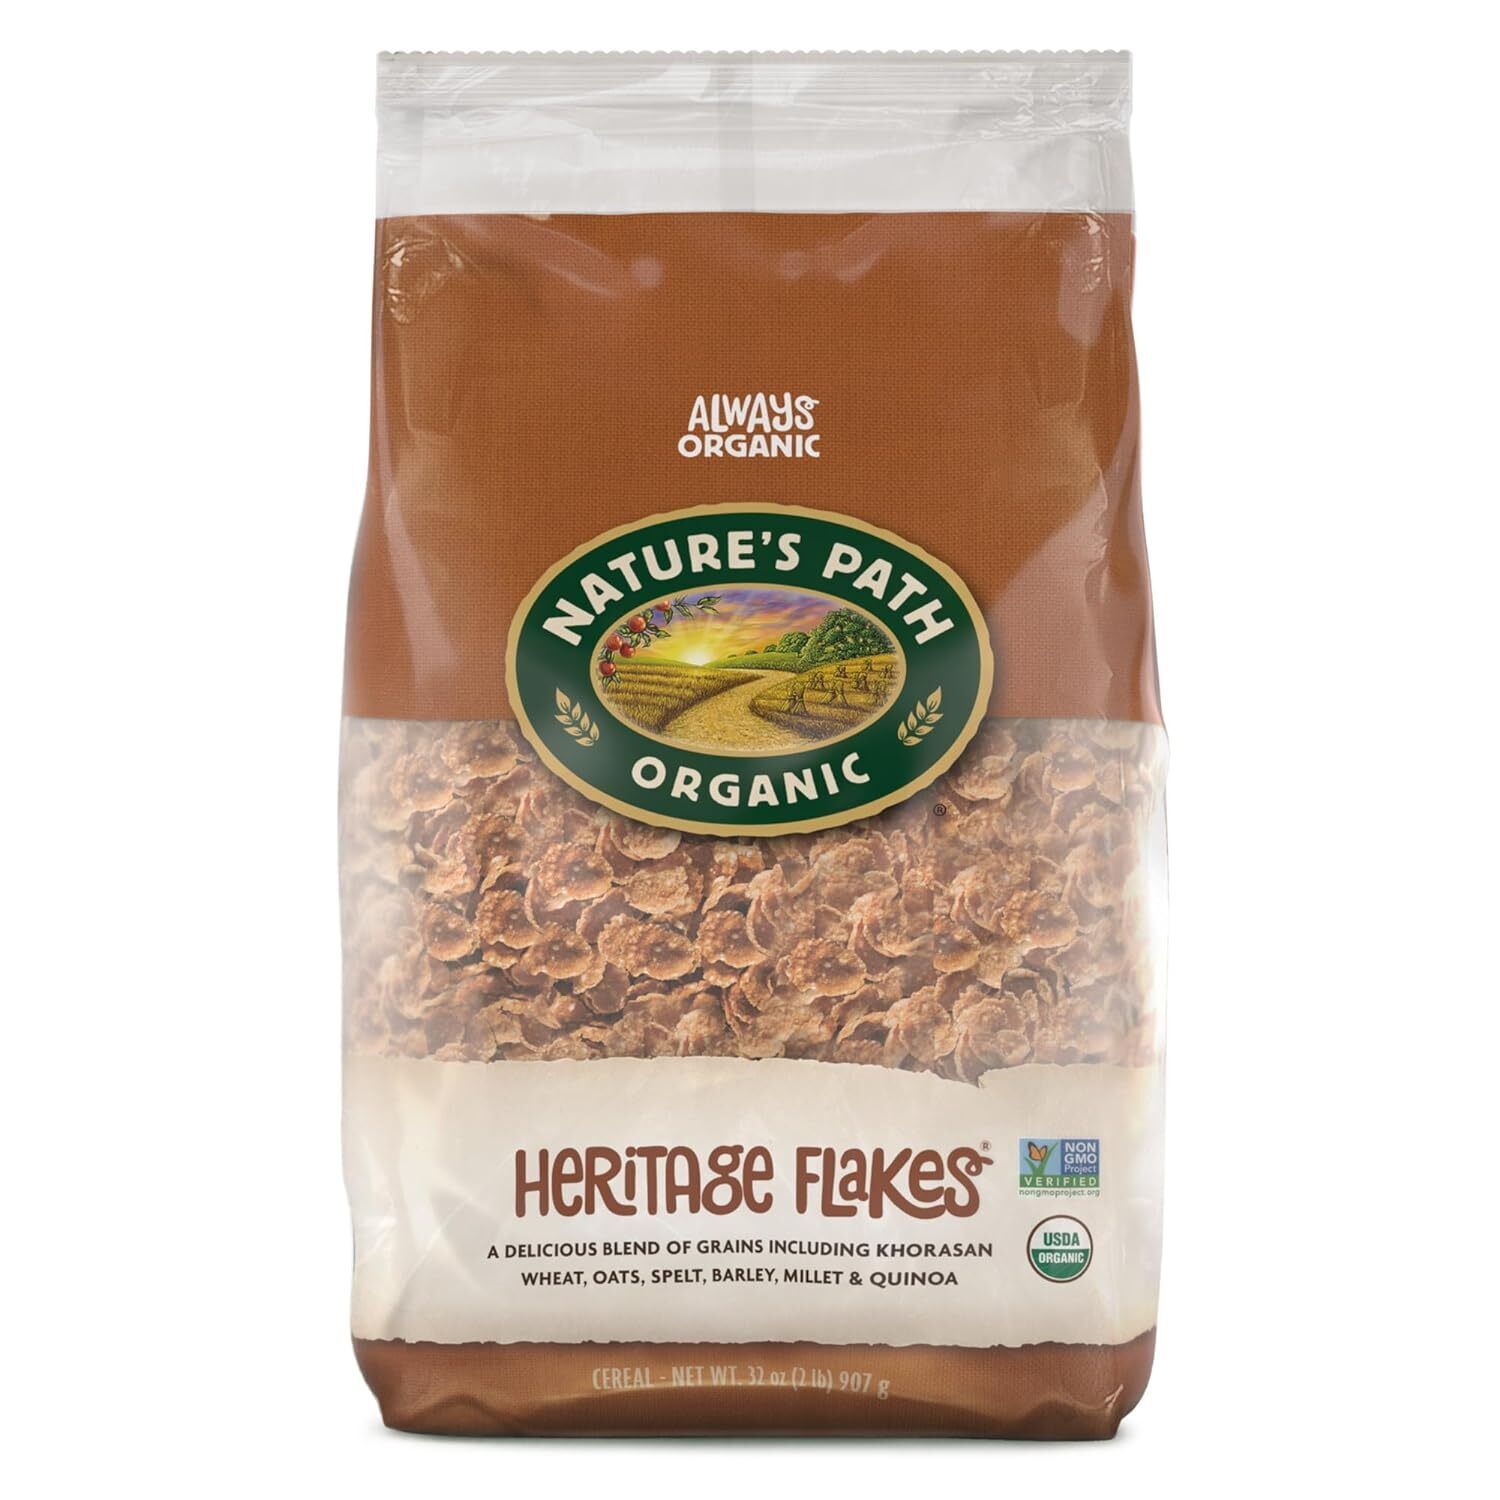 Organic Heritage Flakes Cereal, 2 Lbs. Earth Friendly Package (Pack of 6)...